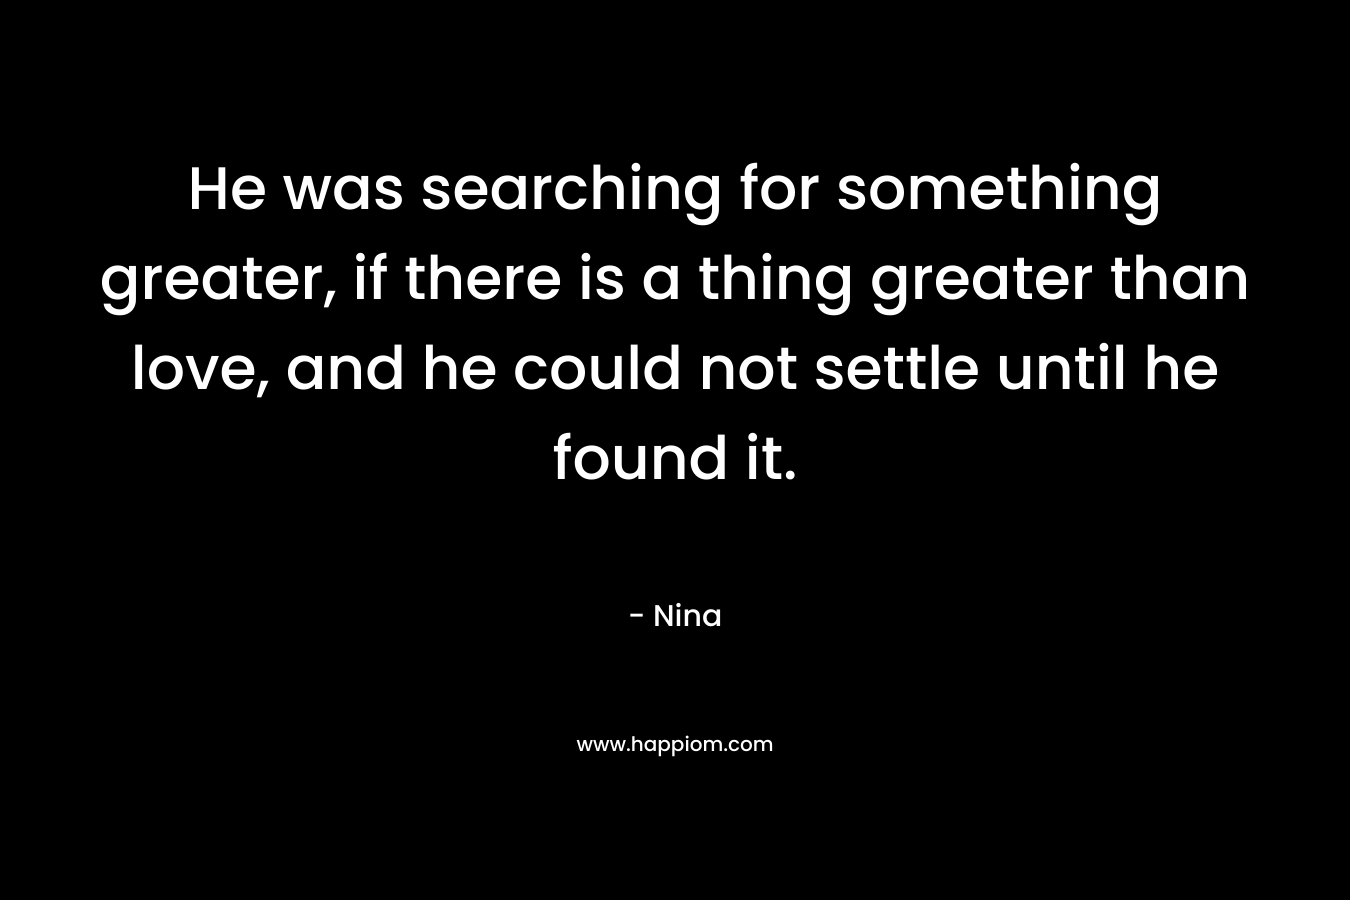 He was searching for something greater, if there is a thing greater than love, and he could not settle until he found it.